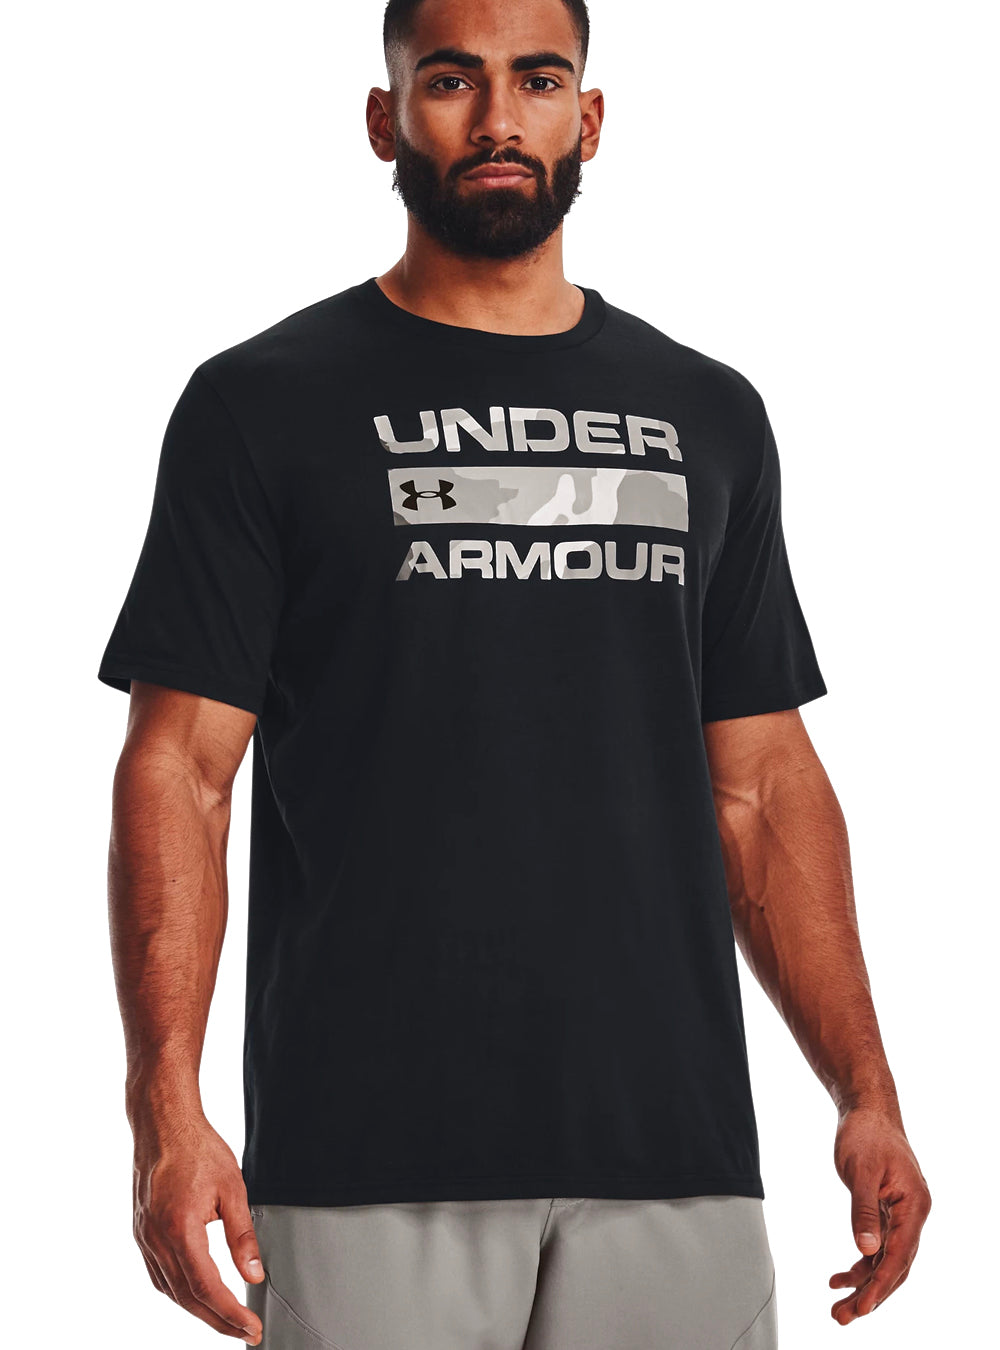 SALE - Under Armour Men's Stacked Logo Fill T-Shirt - Black